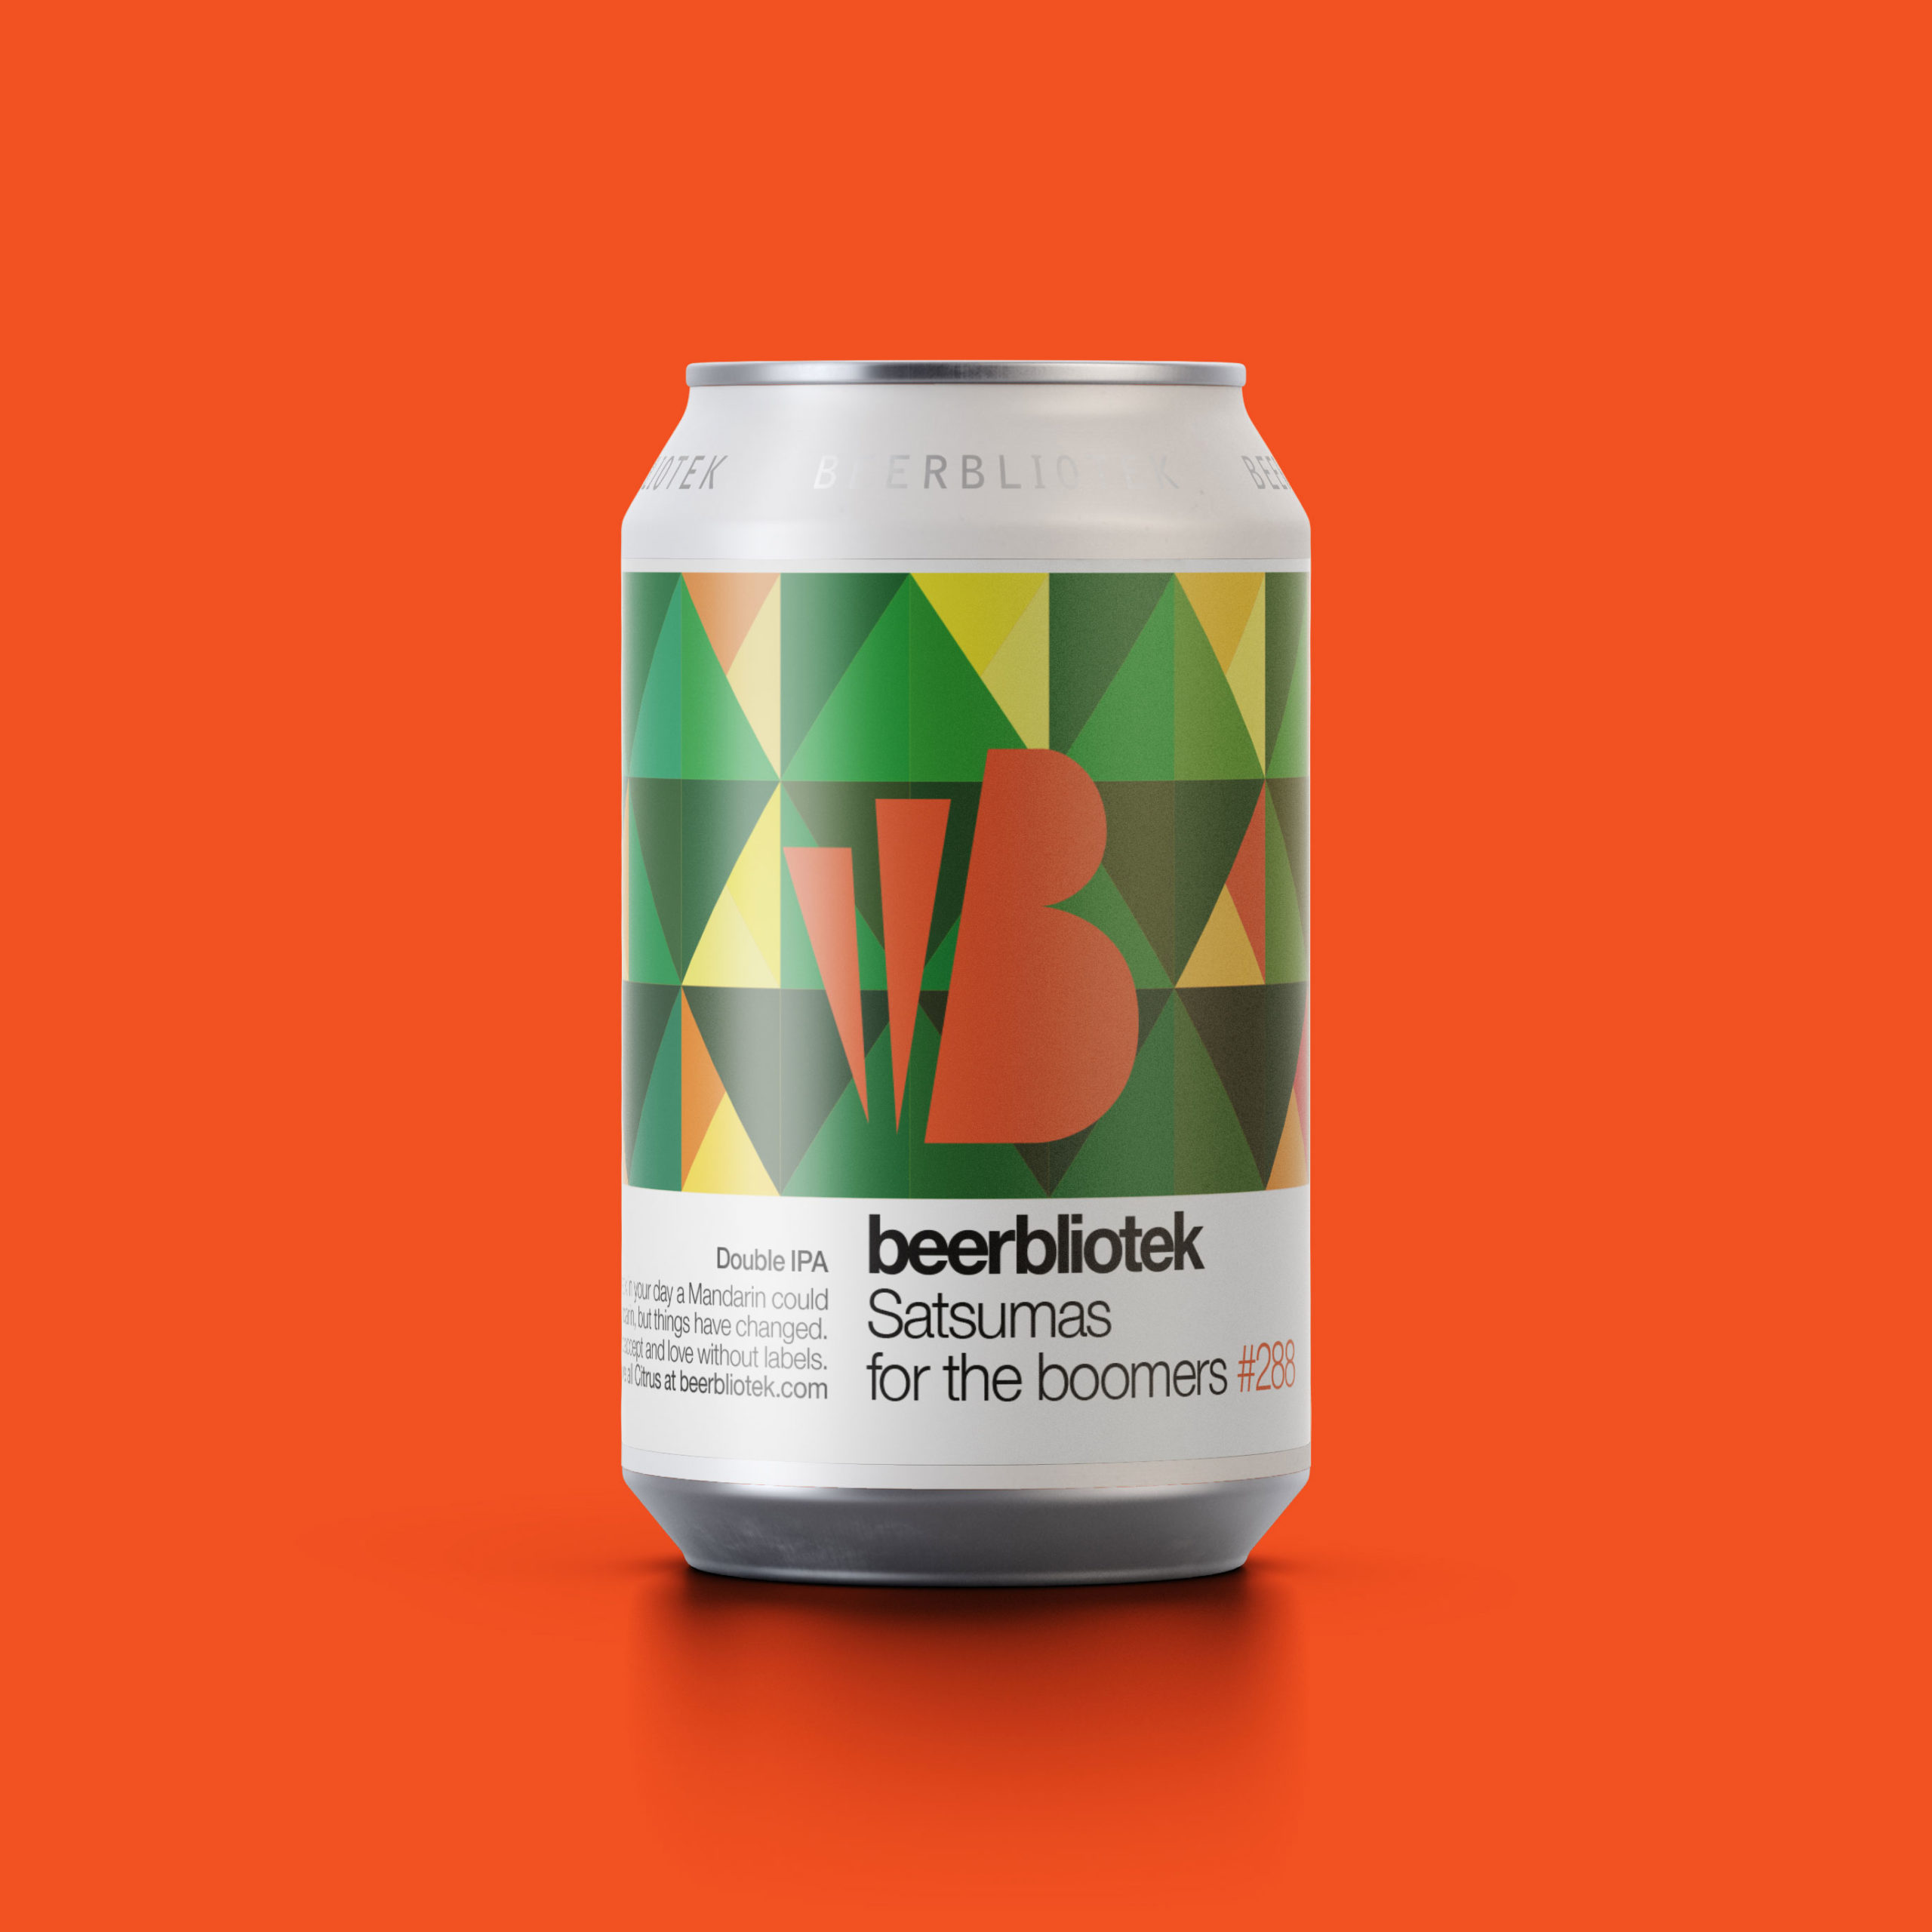 A can packshot of Satsumas for the boomers, a Double IPA, brewed by Swedish Craft Brewery Beerbliotek, in Gothenburg Sweden.